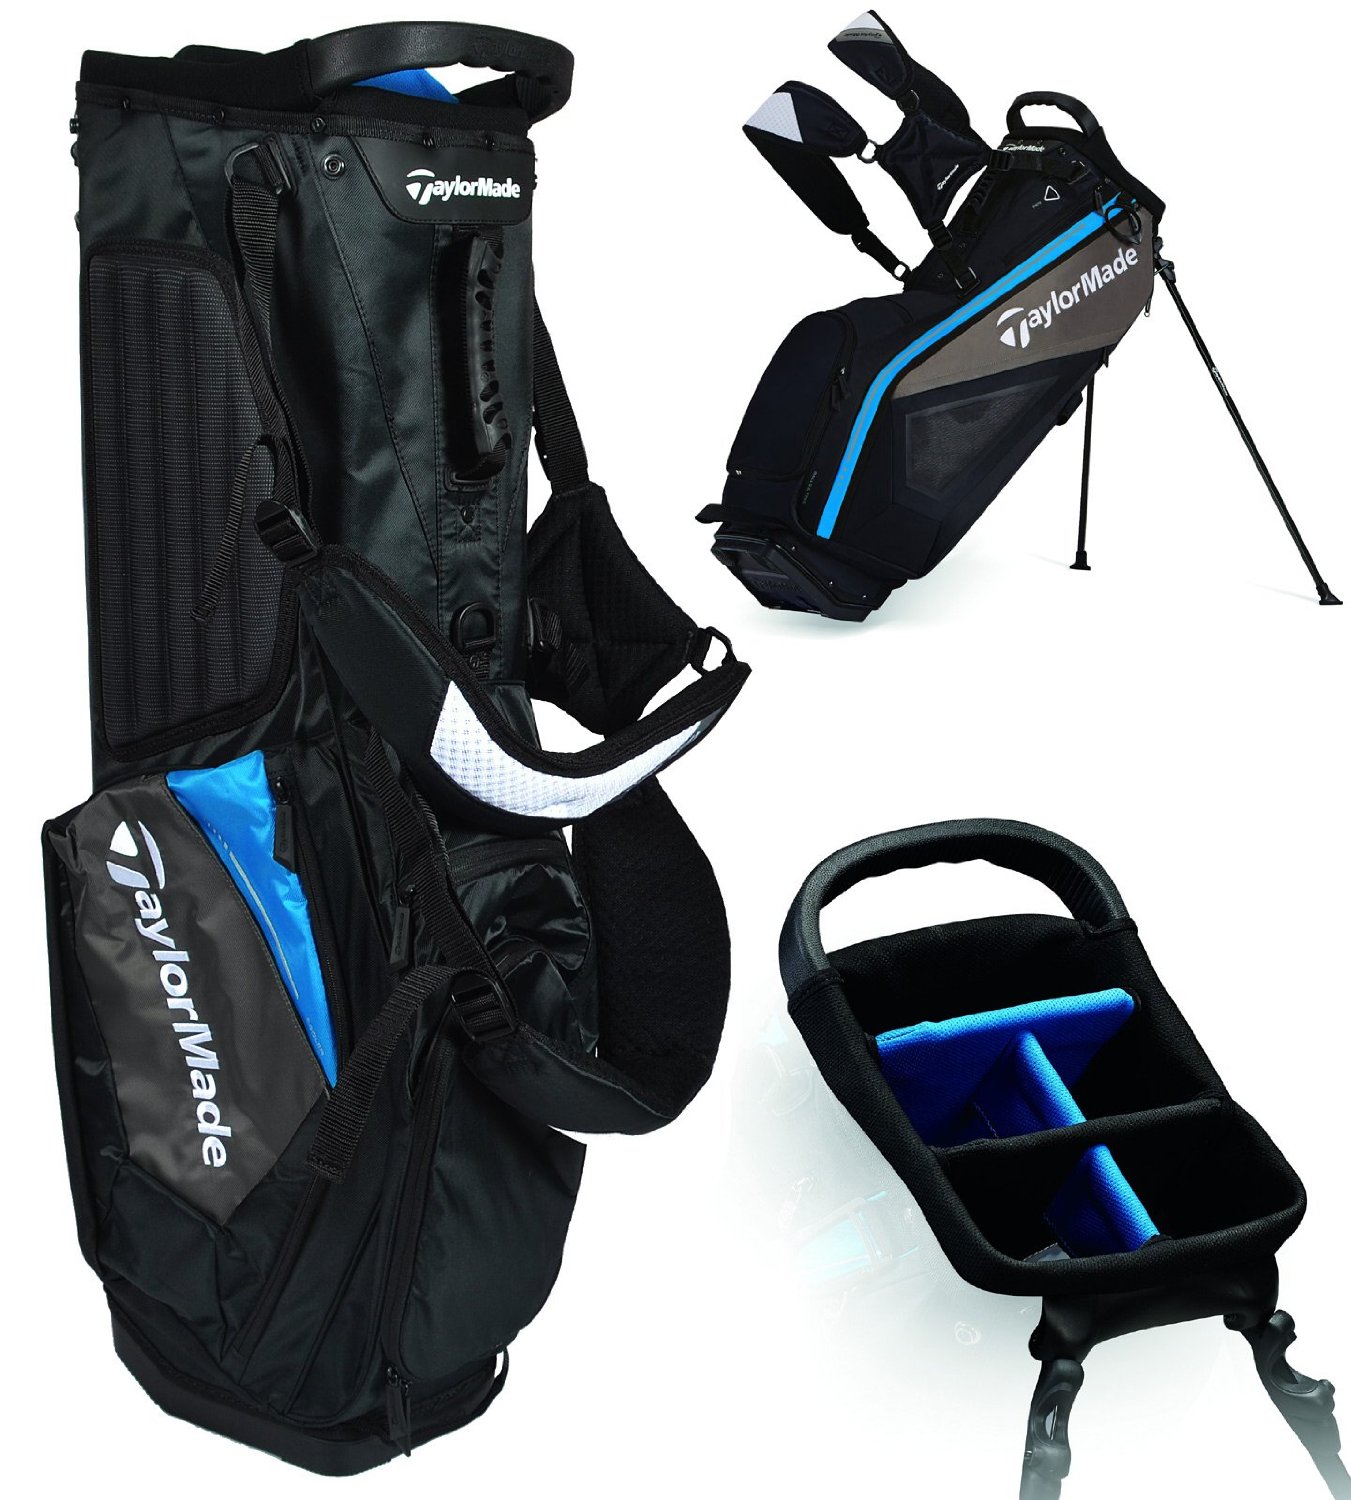 Taylormade Mens Purelite Stand Bags